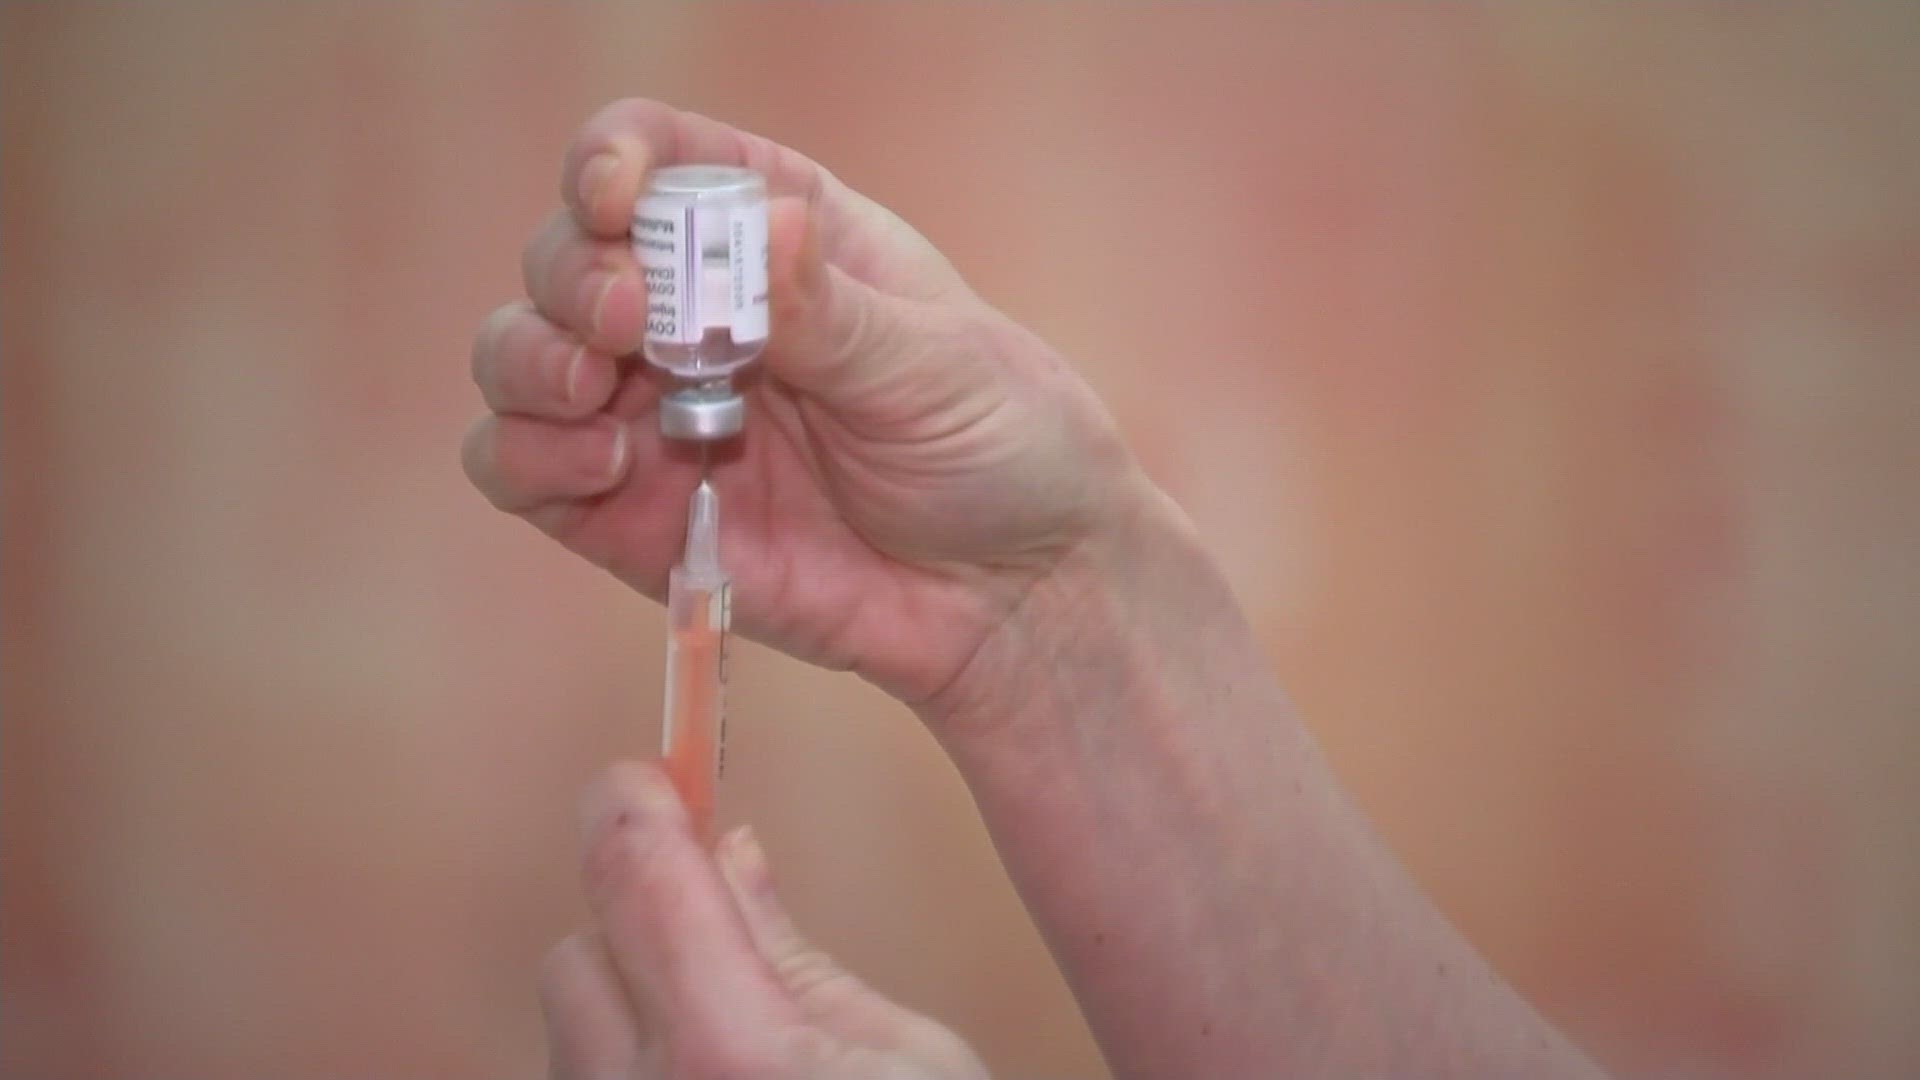 The FDA and the CDC are urging Americans to get an updated COVID-19 vaccine shot as the nation sees a rise in cases, hospitalizations and deaths.